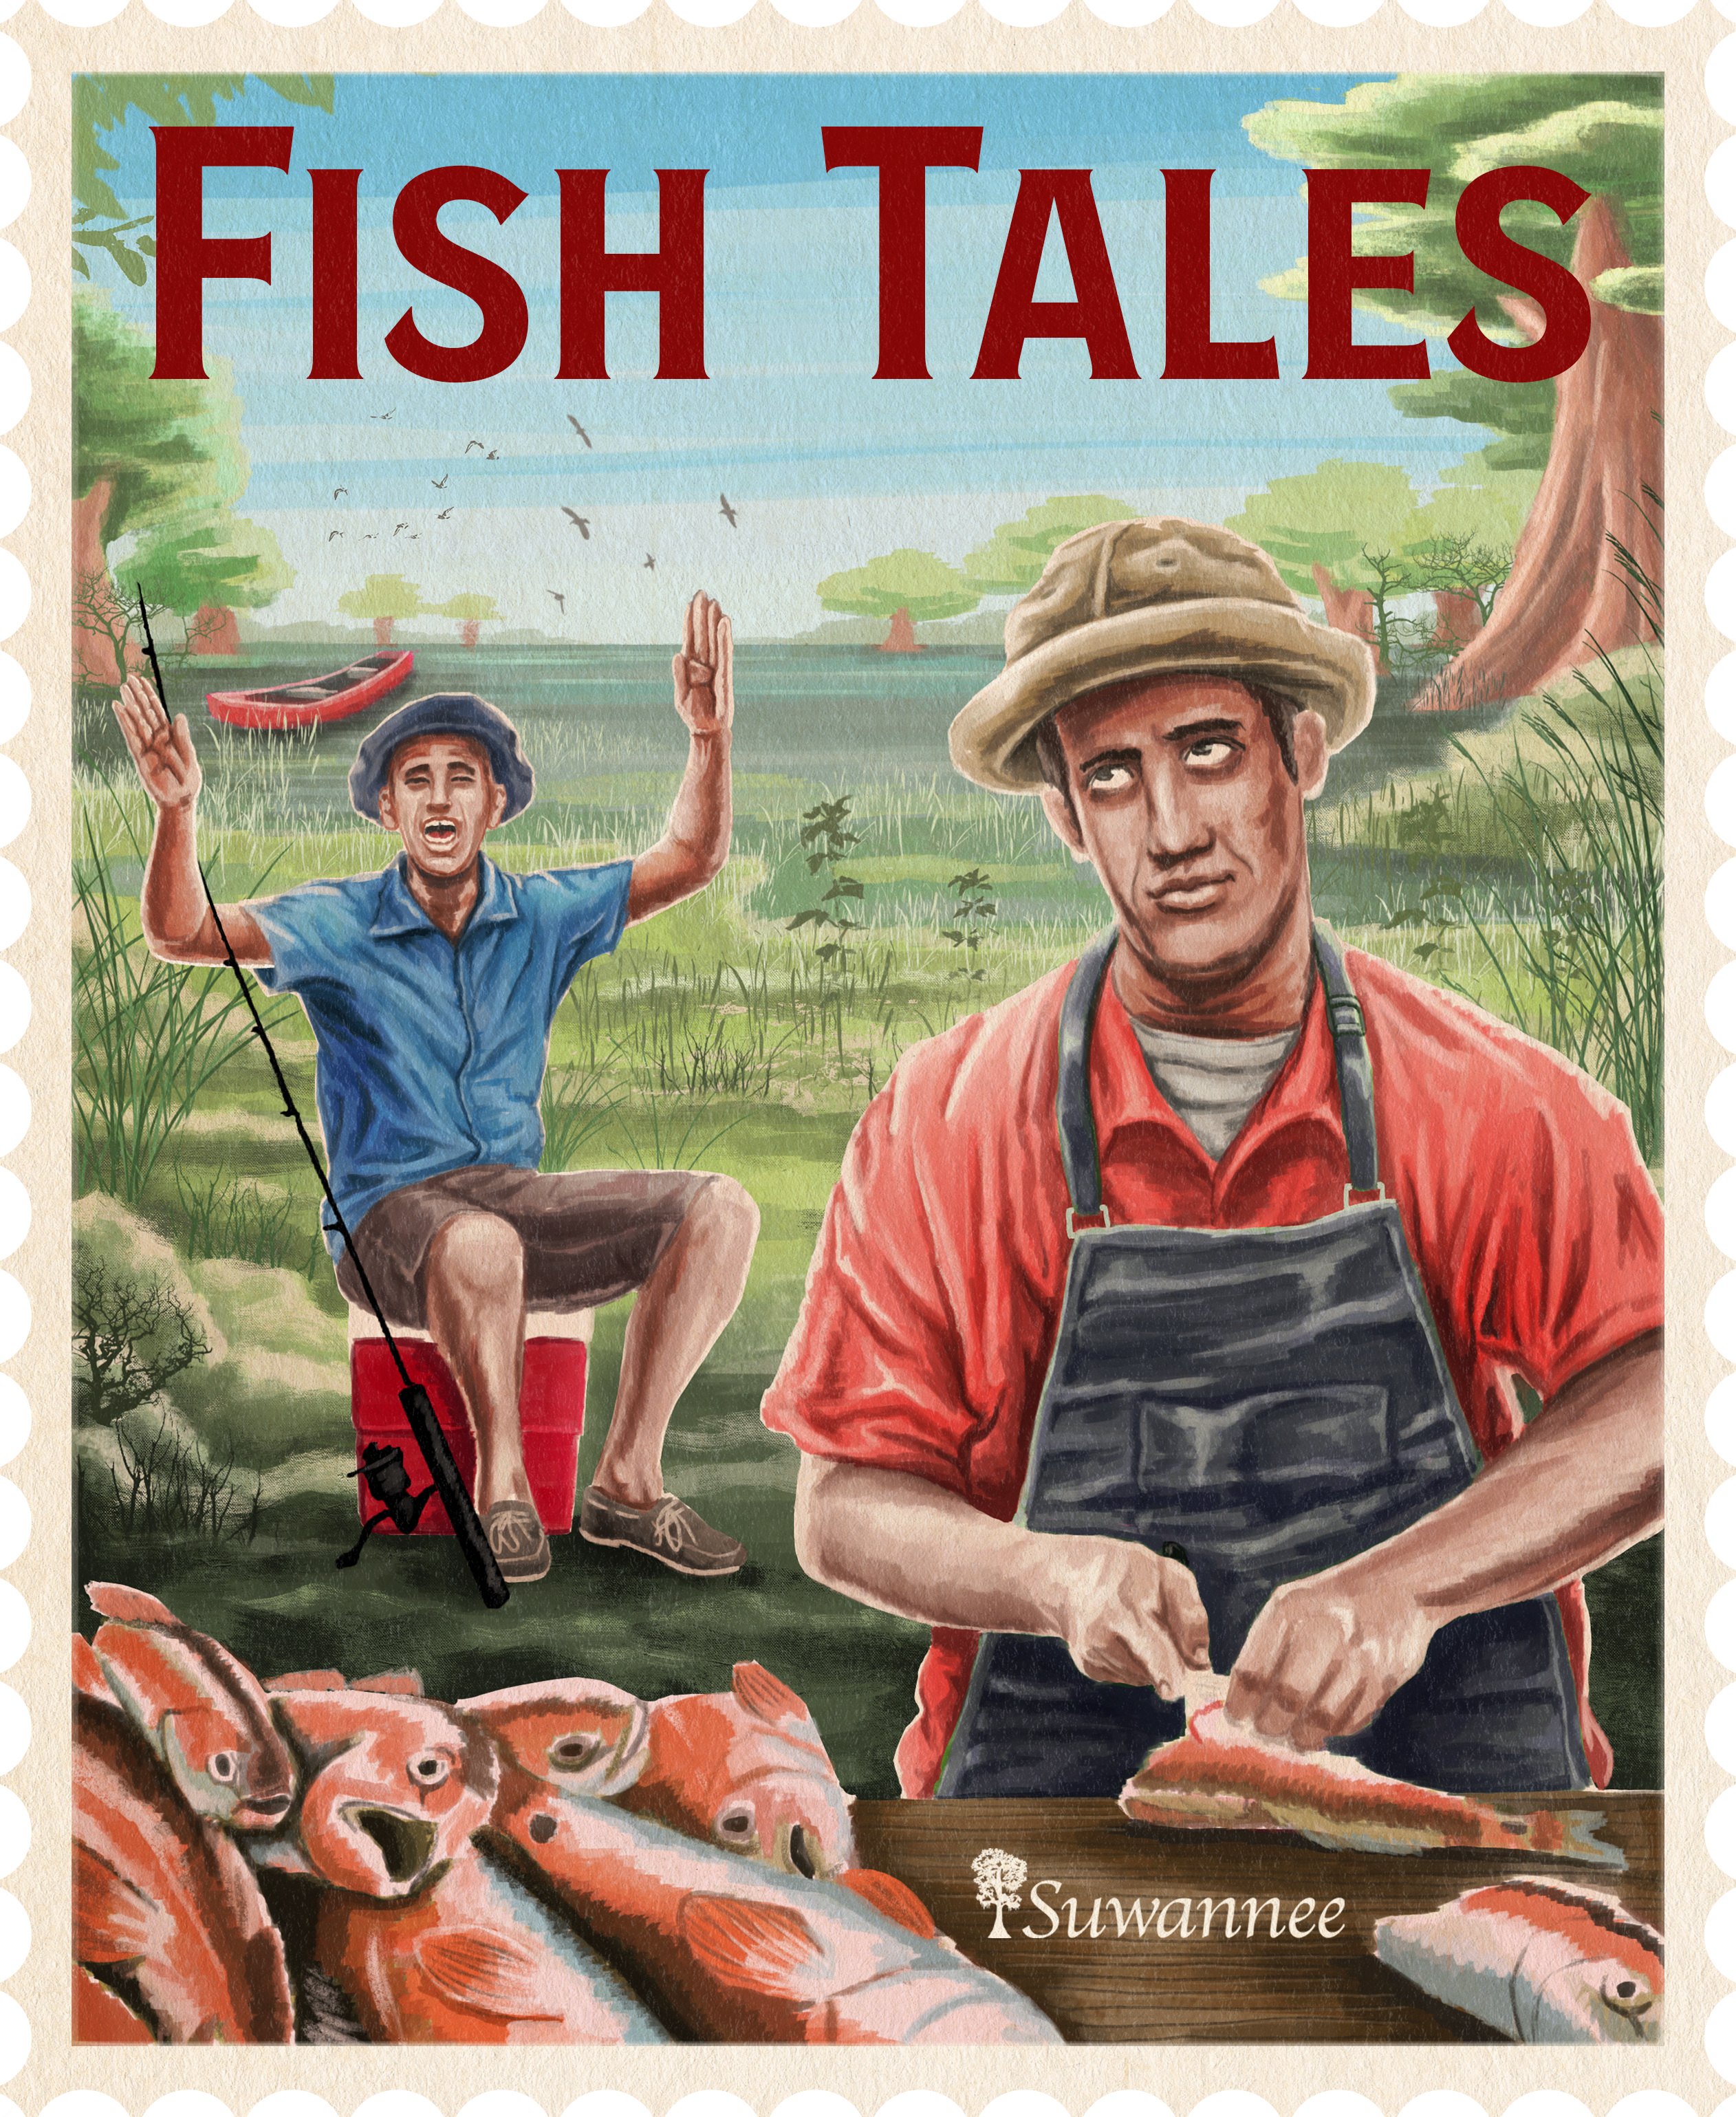 Stamp image of two guys at fishing camp, one working, one lying about the size of his fish. Titled Fish Tales. With Suwannee Brand Apparel logo at bottom